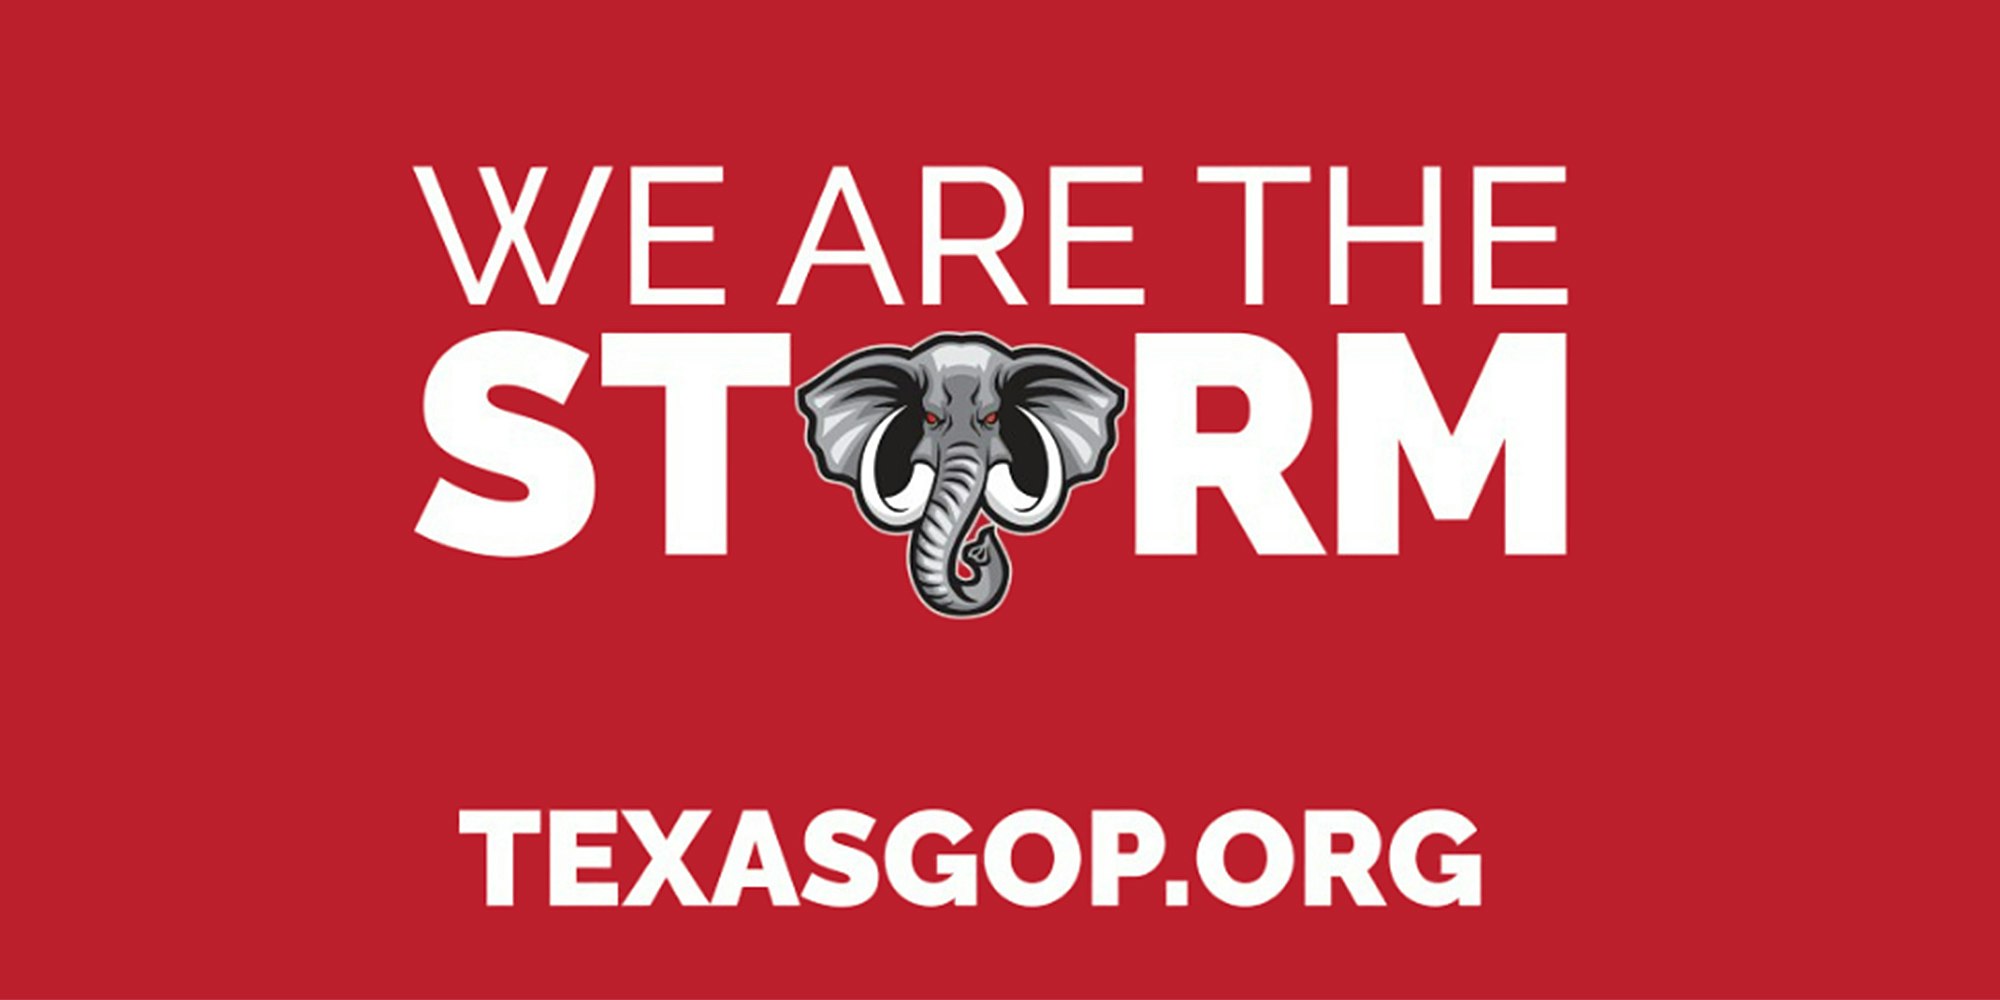 "We are the storm texasgop.org" with the O in storm replaced with an elephant